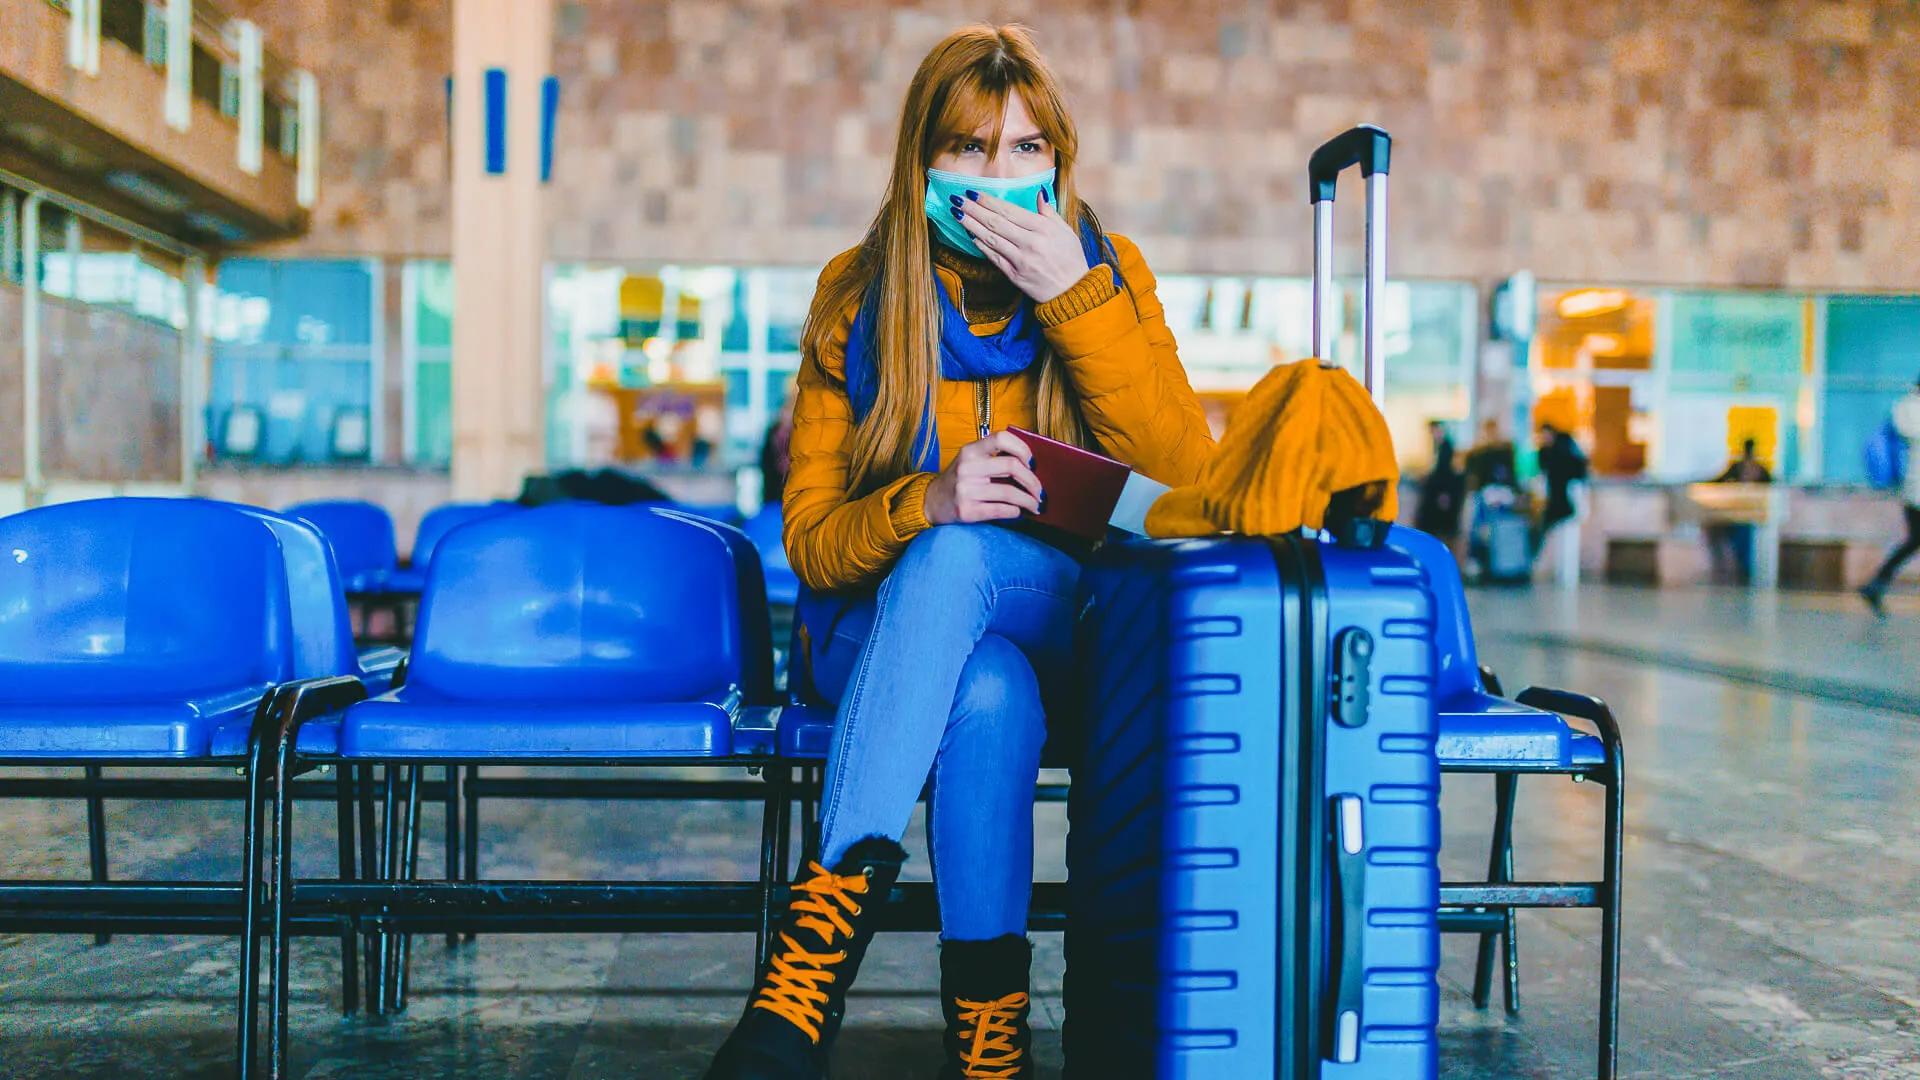 Young woman wearing a protective face mask and waiting for a train at the airport station.